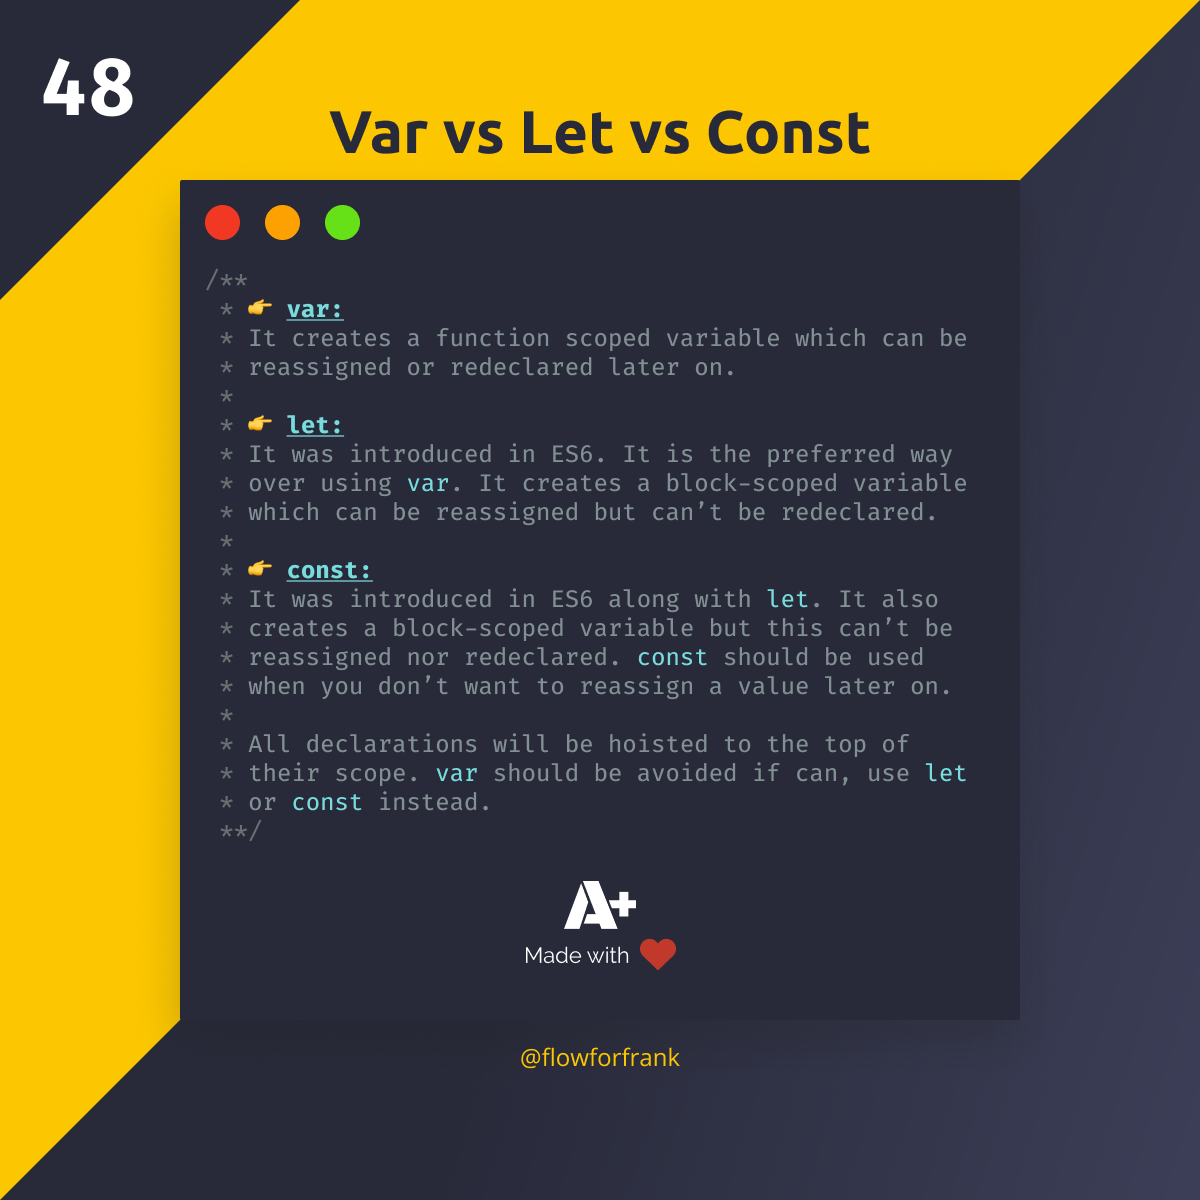 Why are the Differences Between var, let, and const?